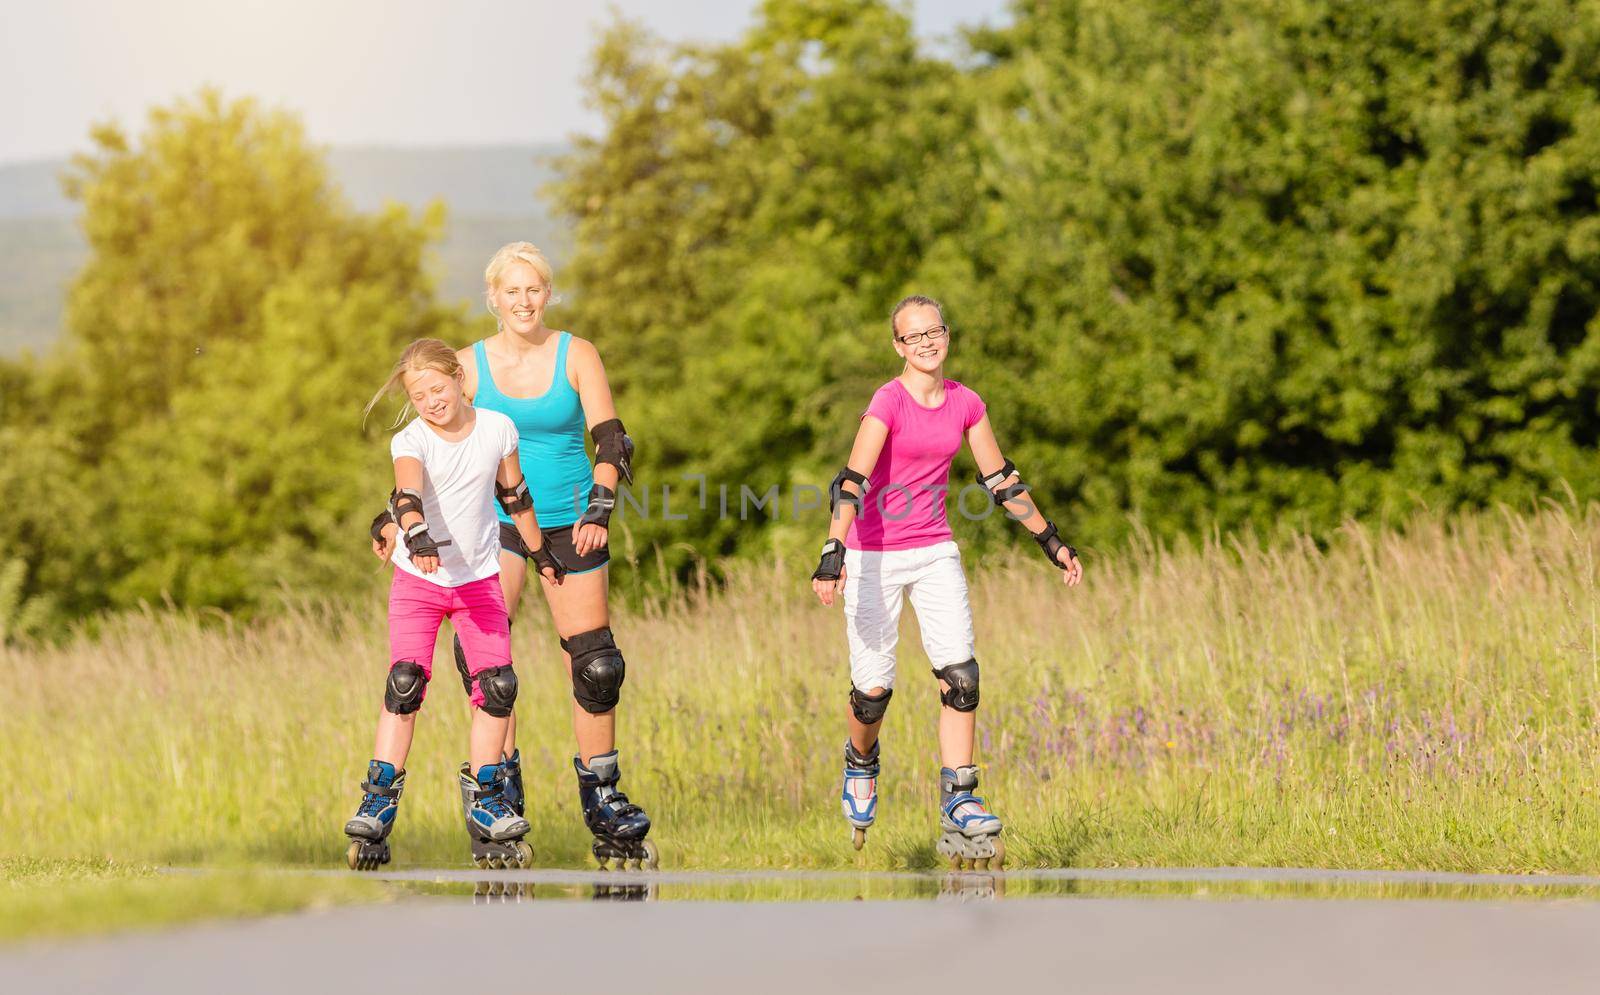 Mother and daughters rollerblading with in-line skates on country lane